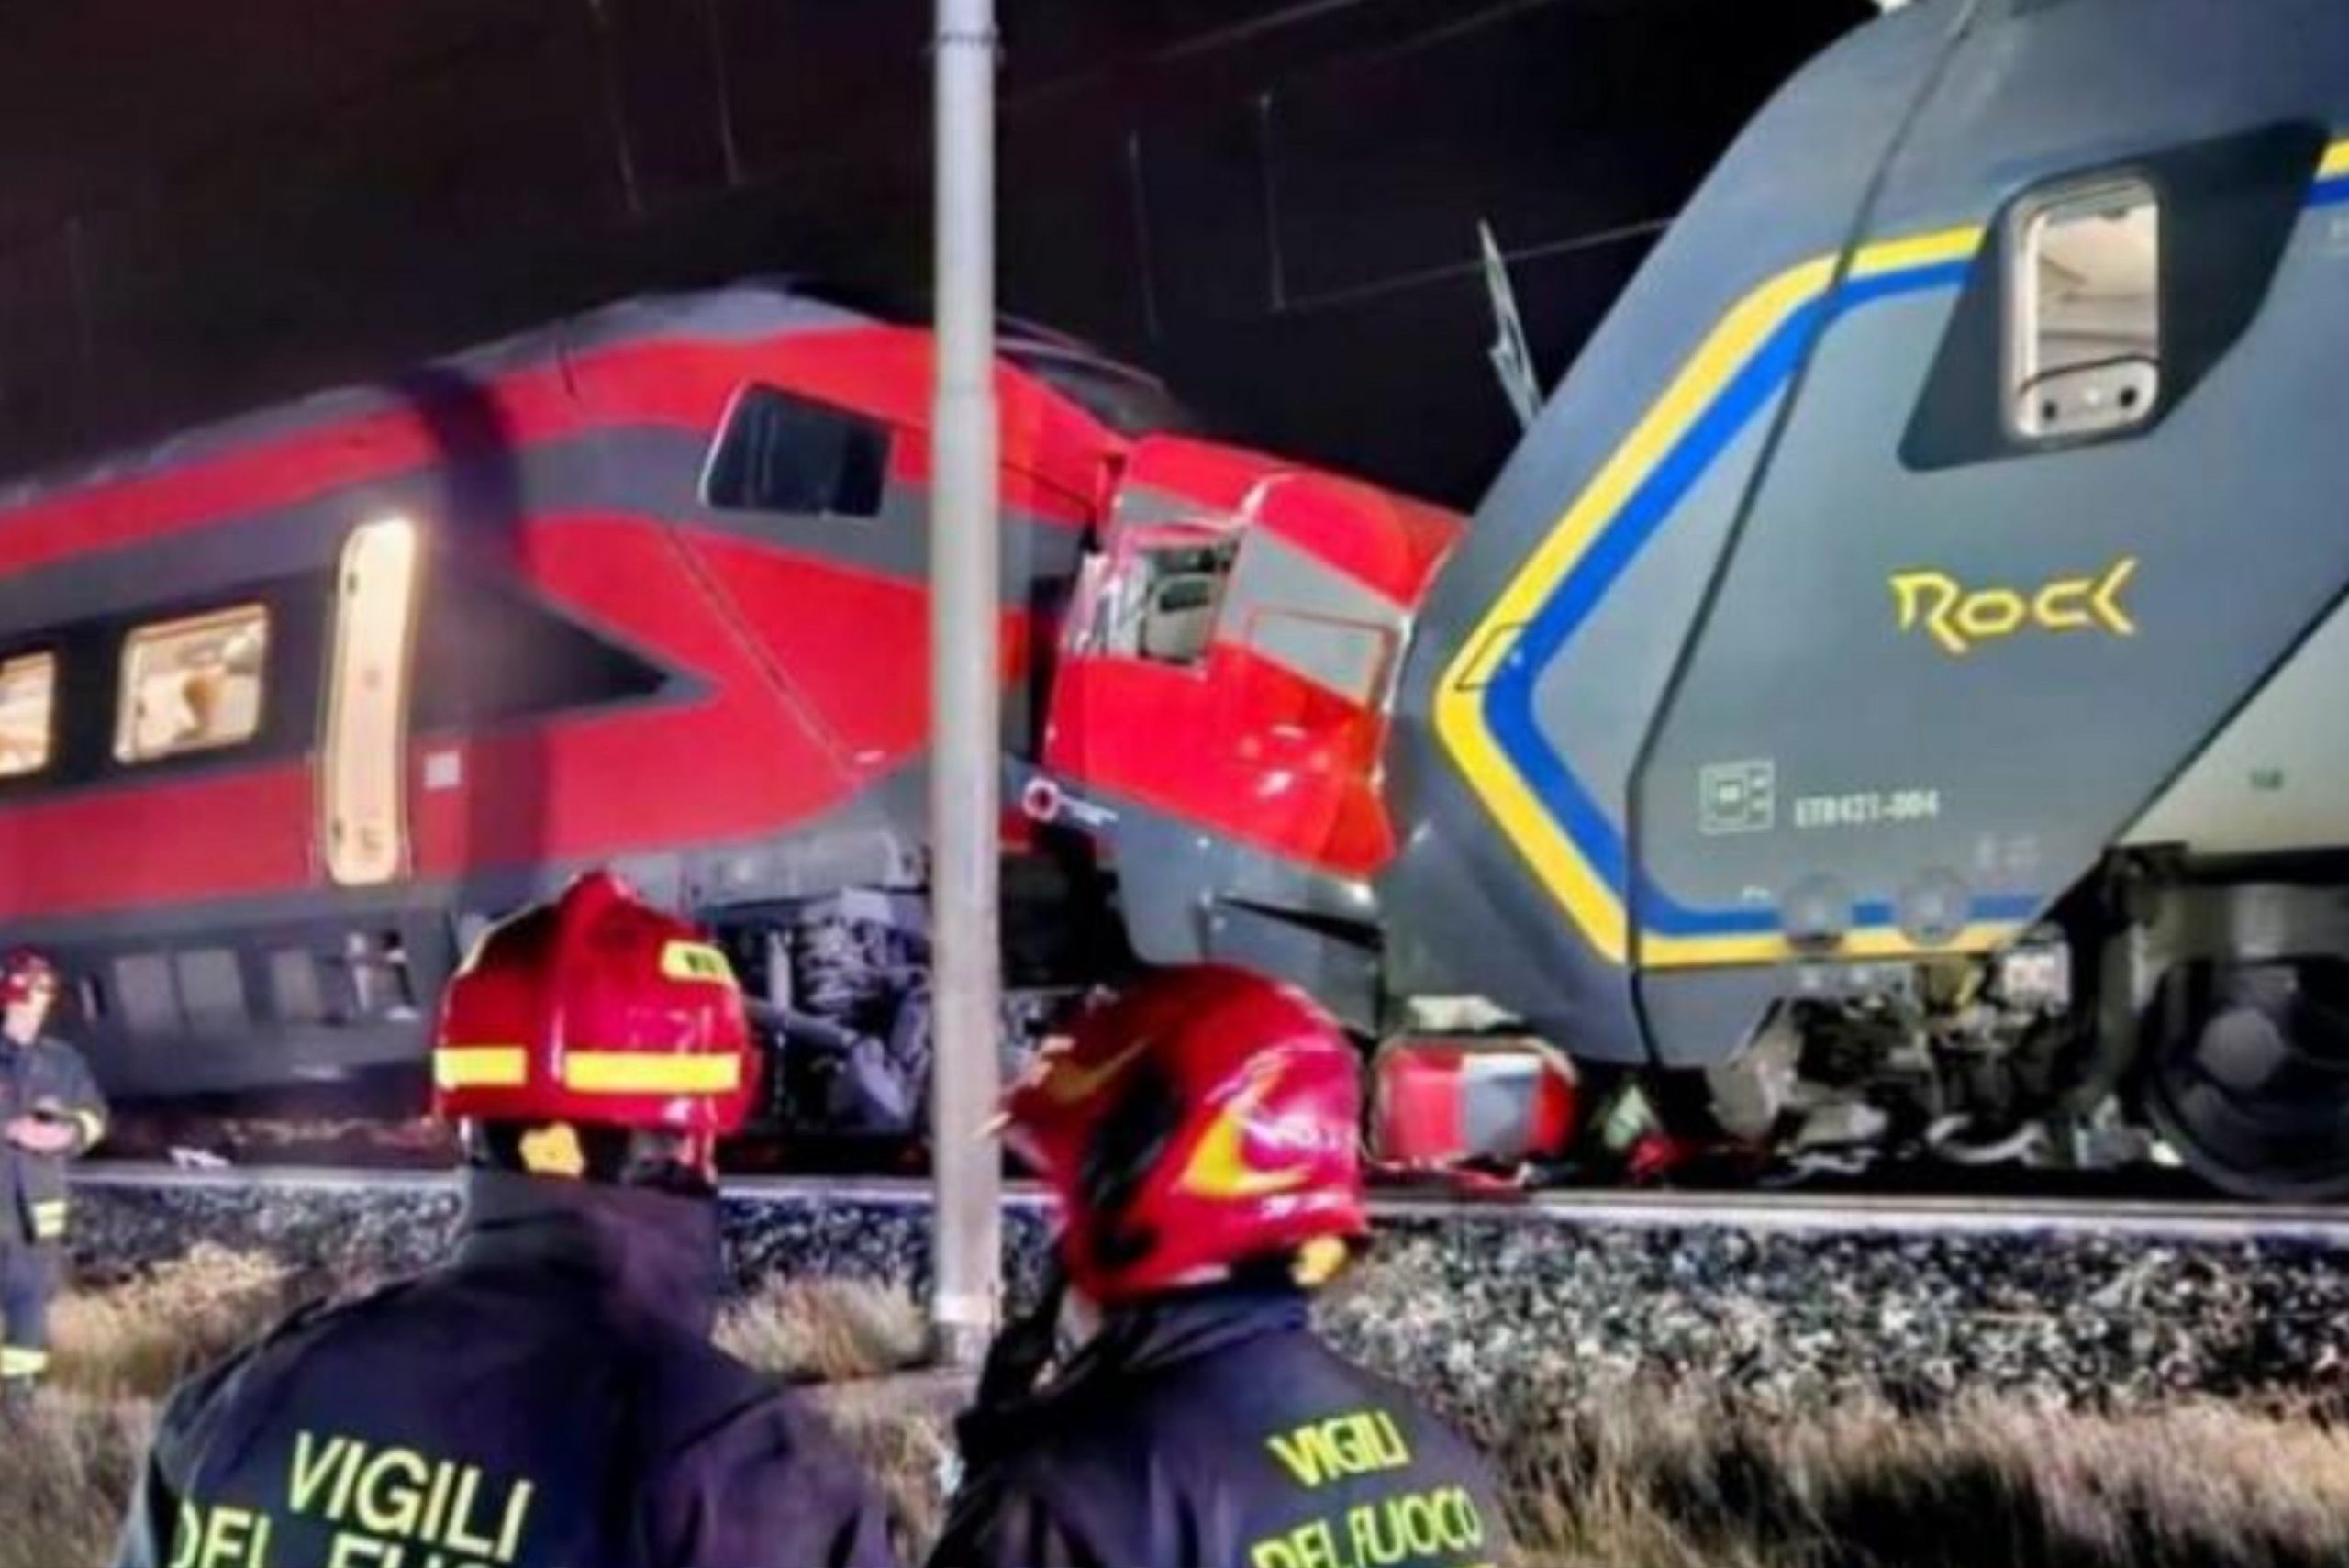 Accident in Italy on Sunday evening: two passenger trains collide, injuring 17 people!, Magnate Daily